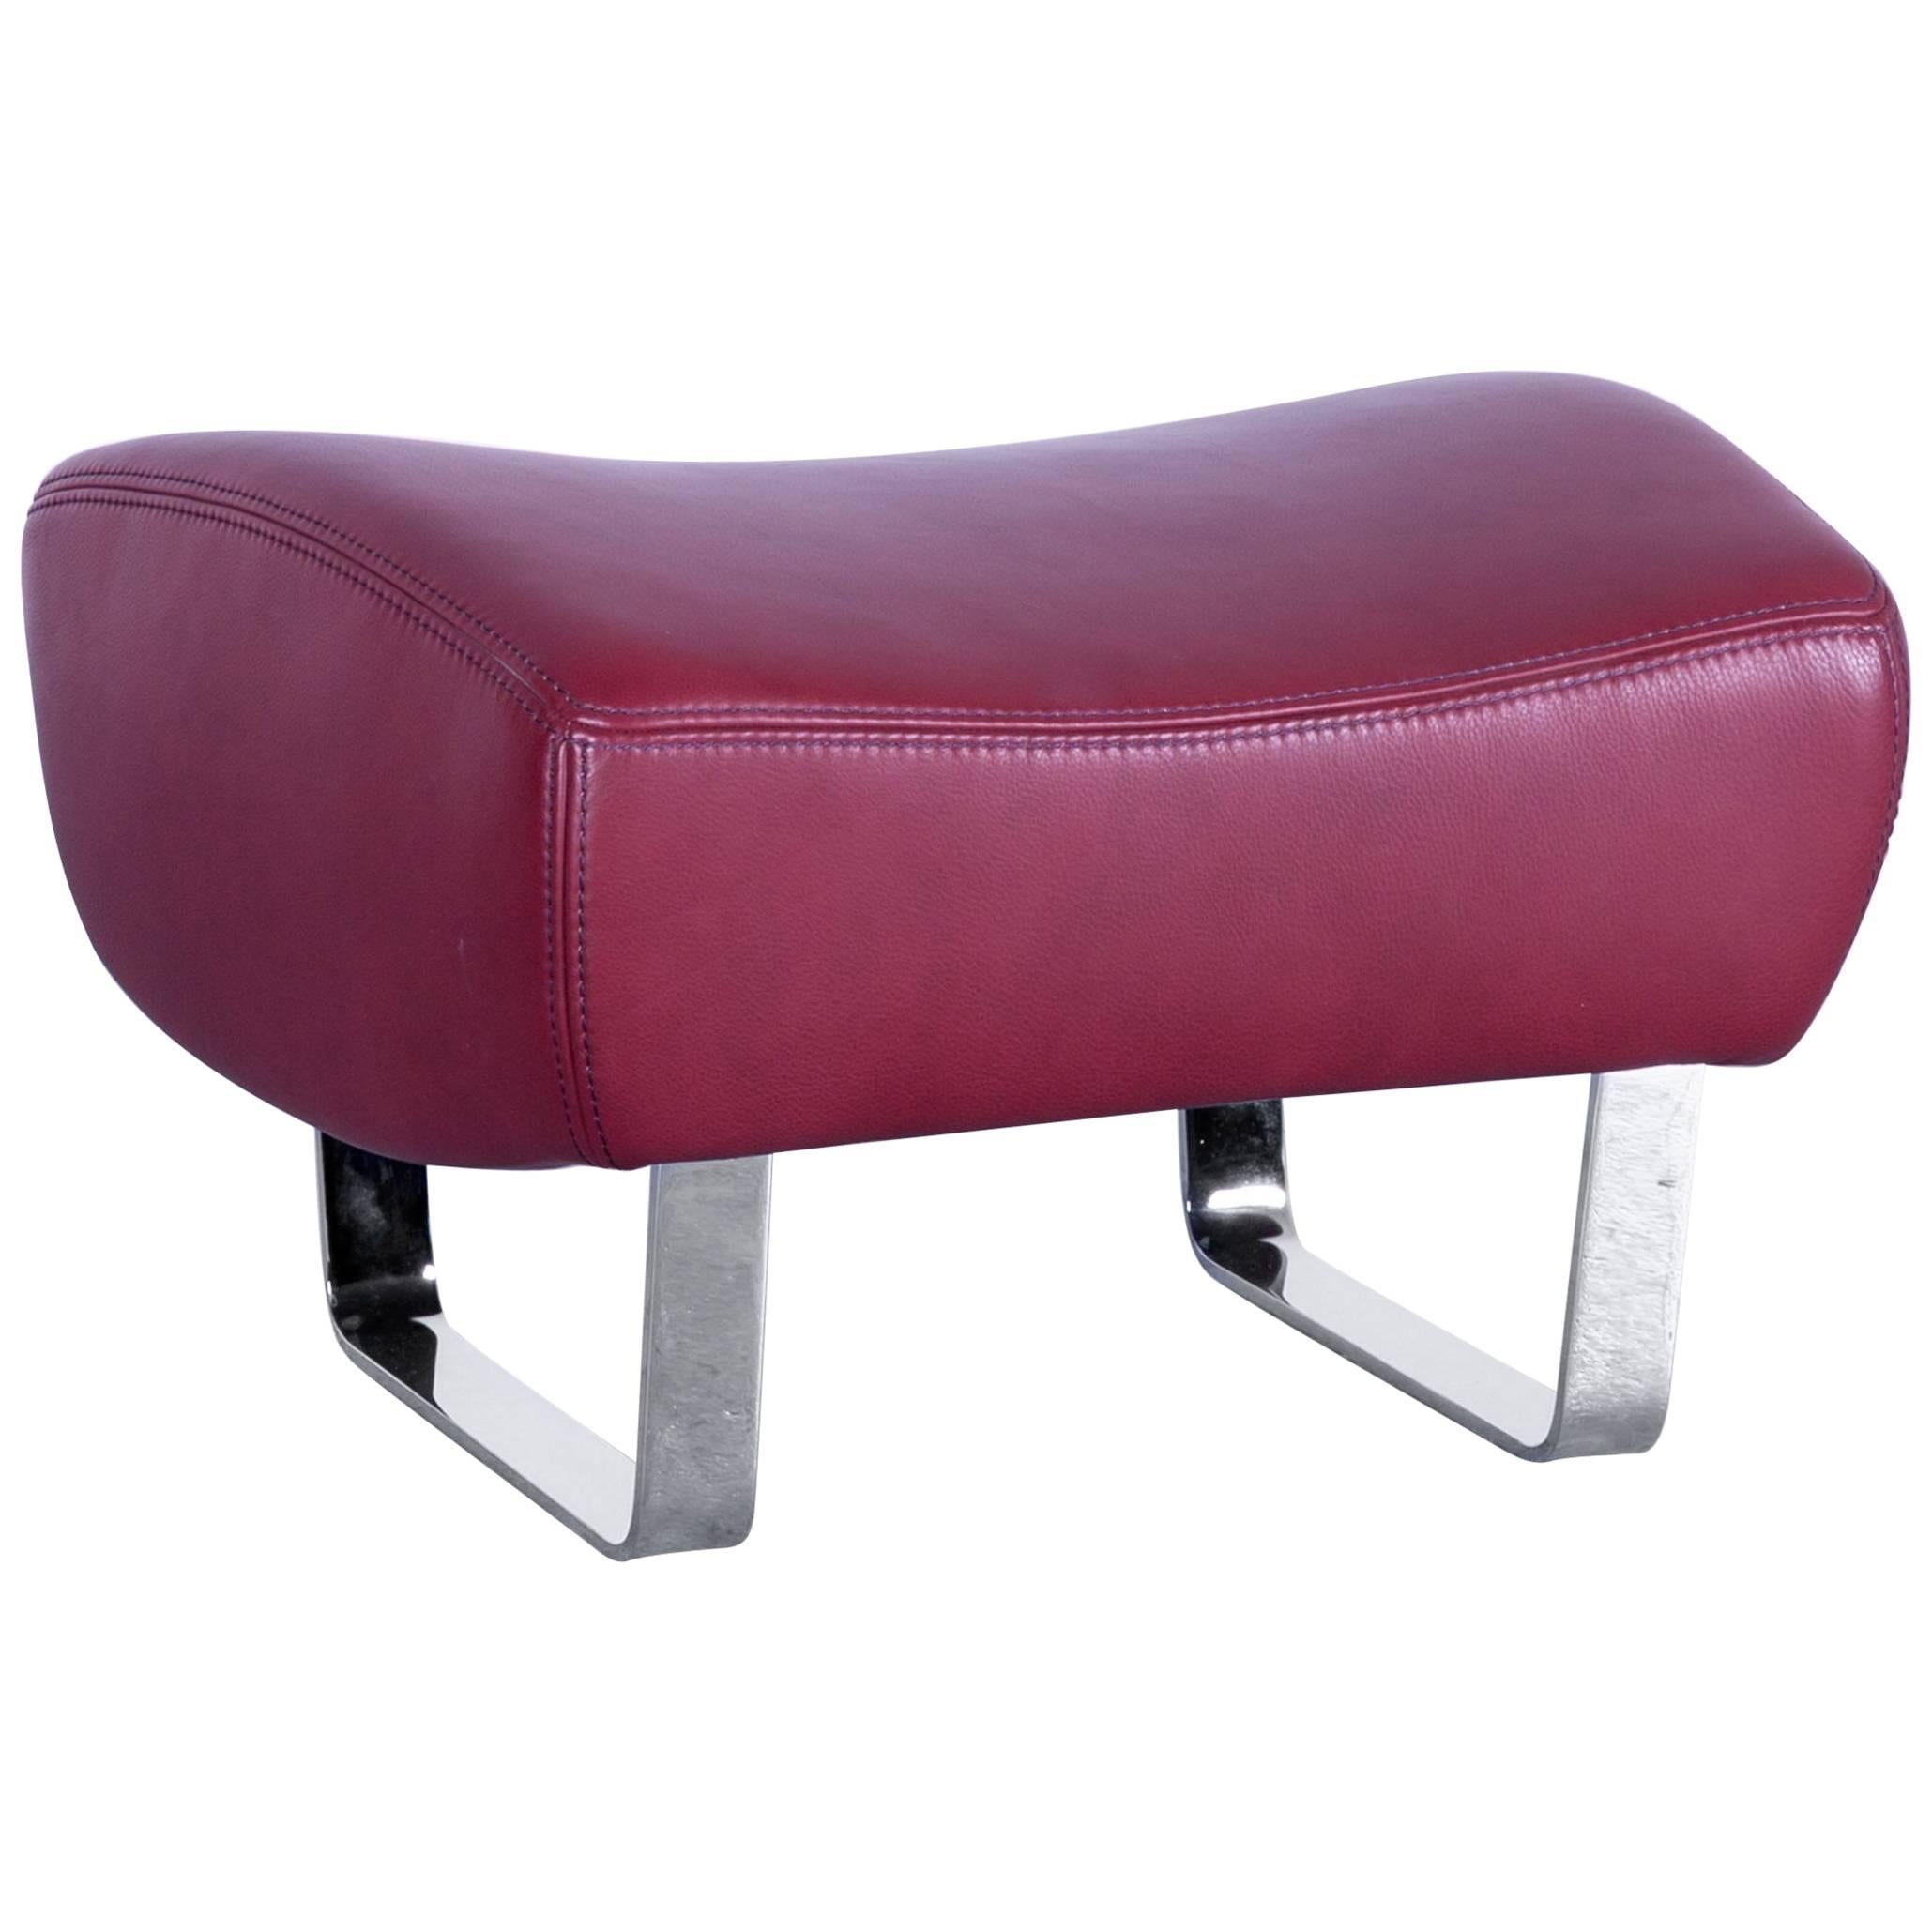 Koinor Designer Footstool Red Wine Colored Leather Footrest Pouf